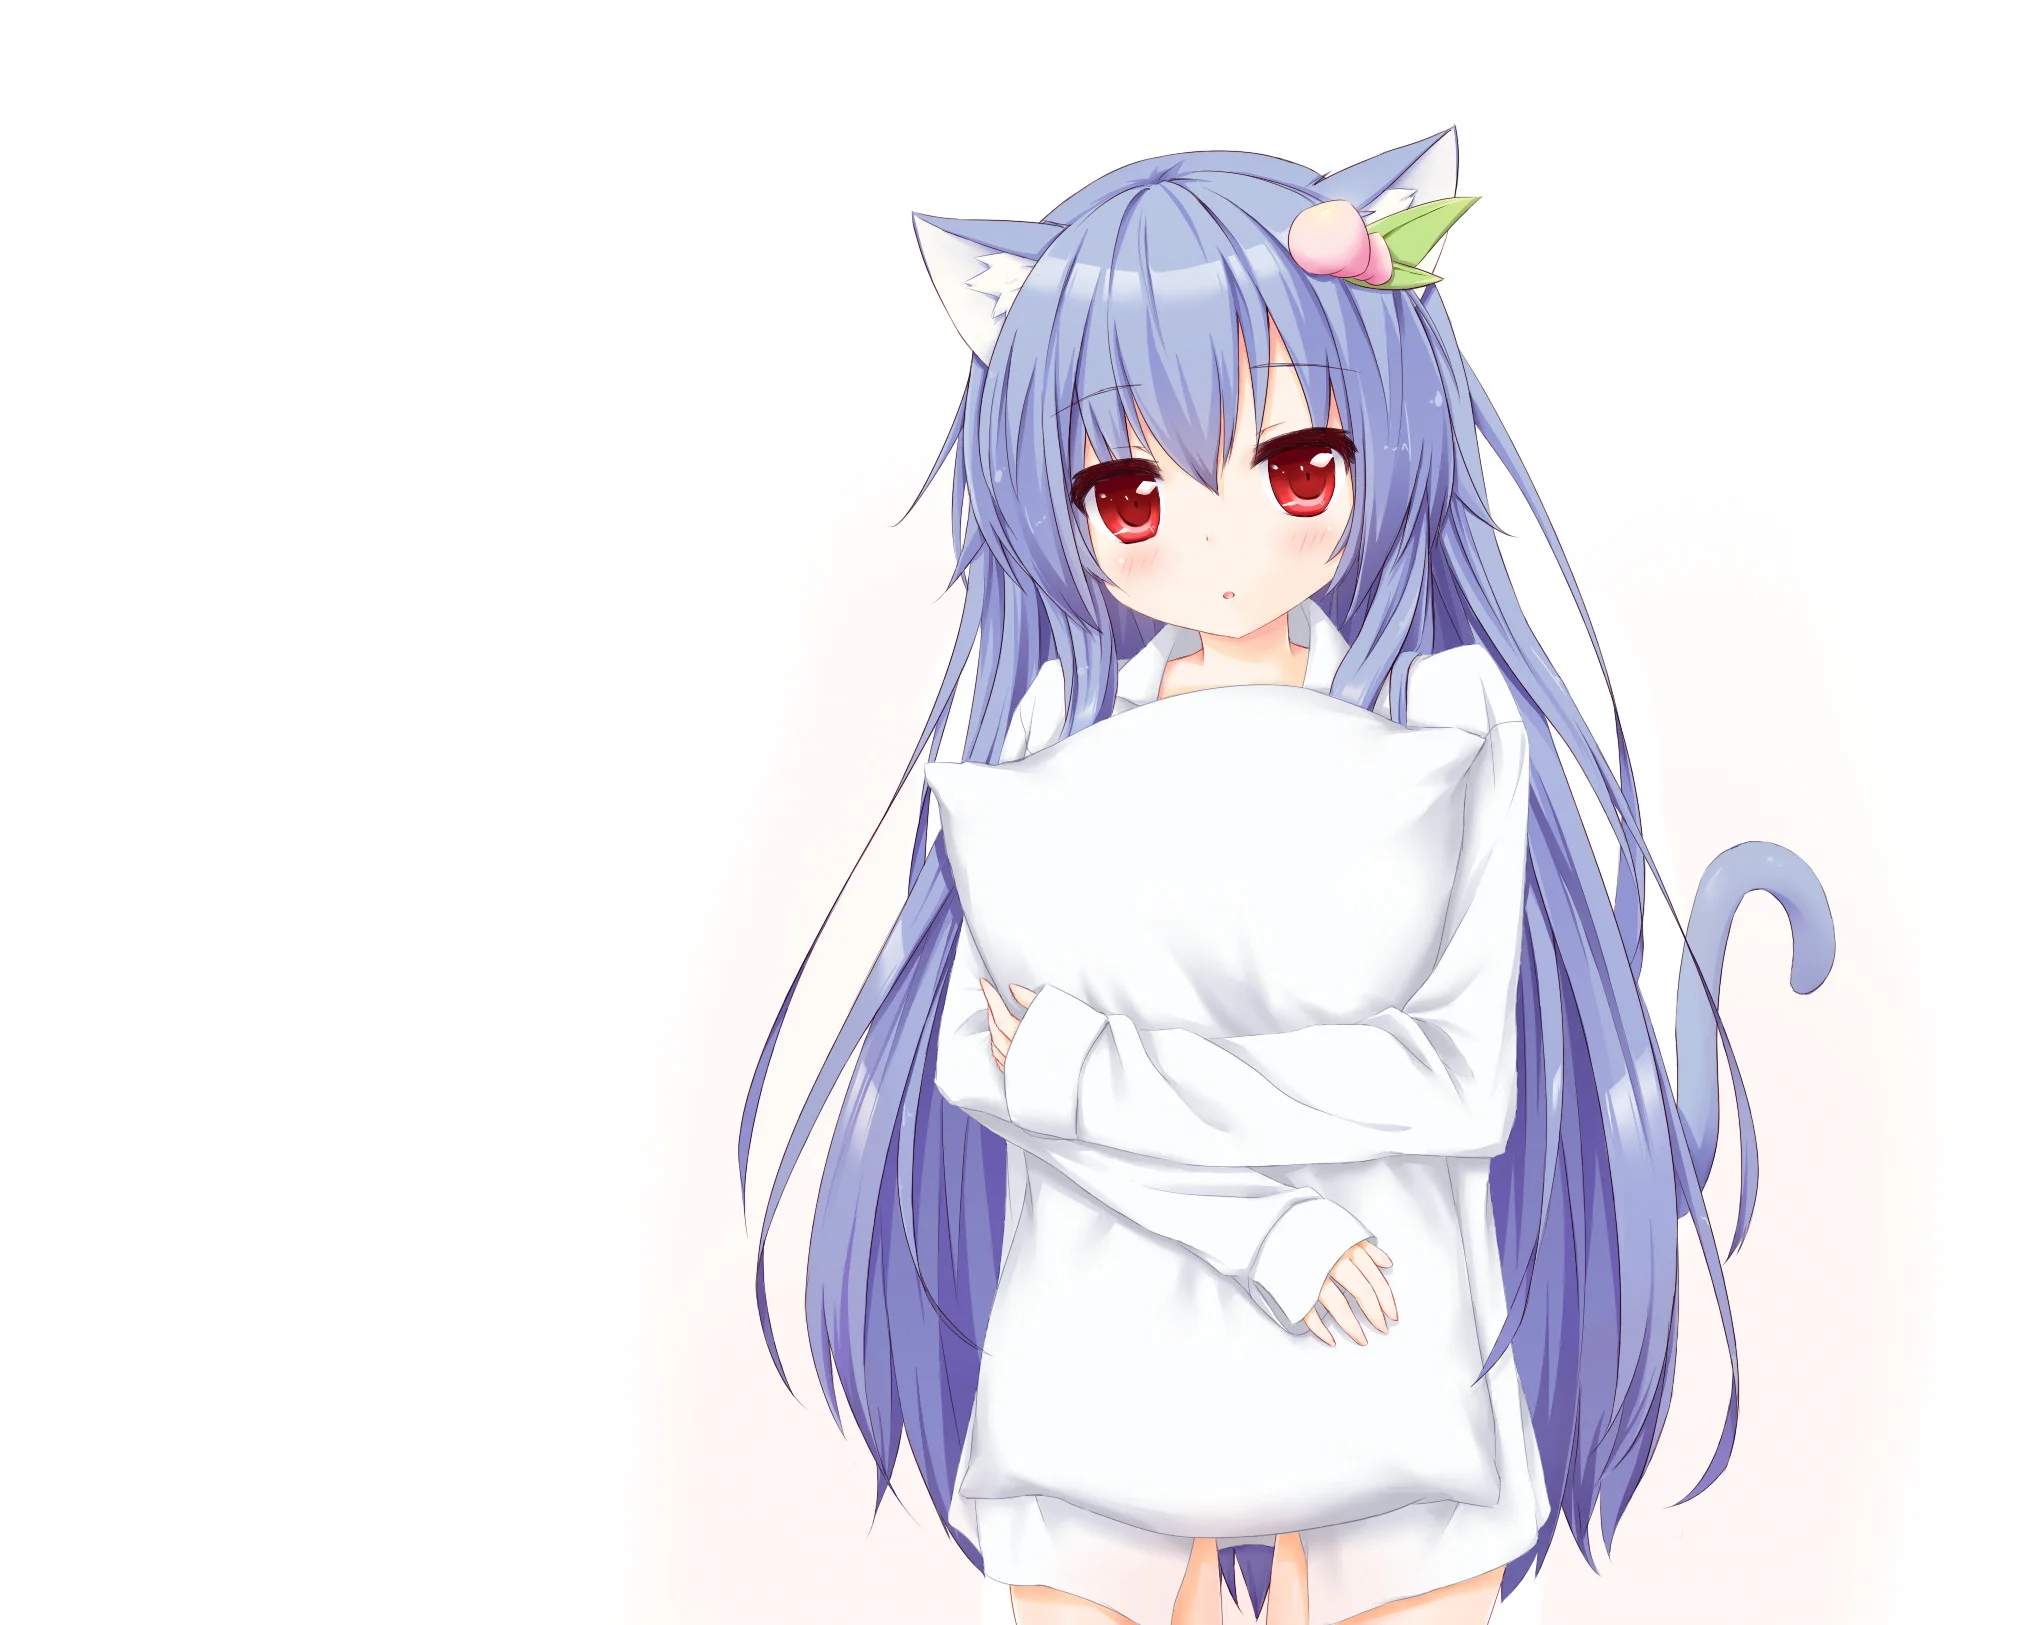 Gallery of Anime Girl With Blue Hair And Cat Ears